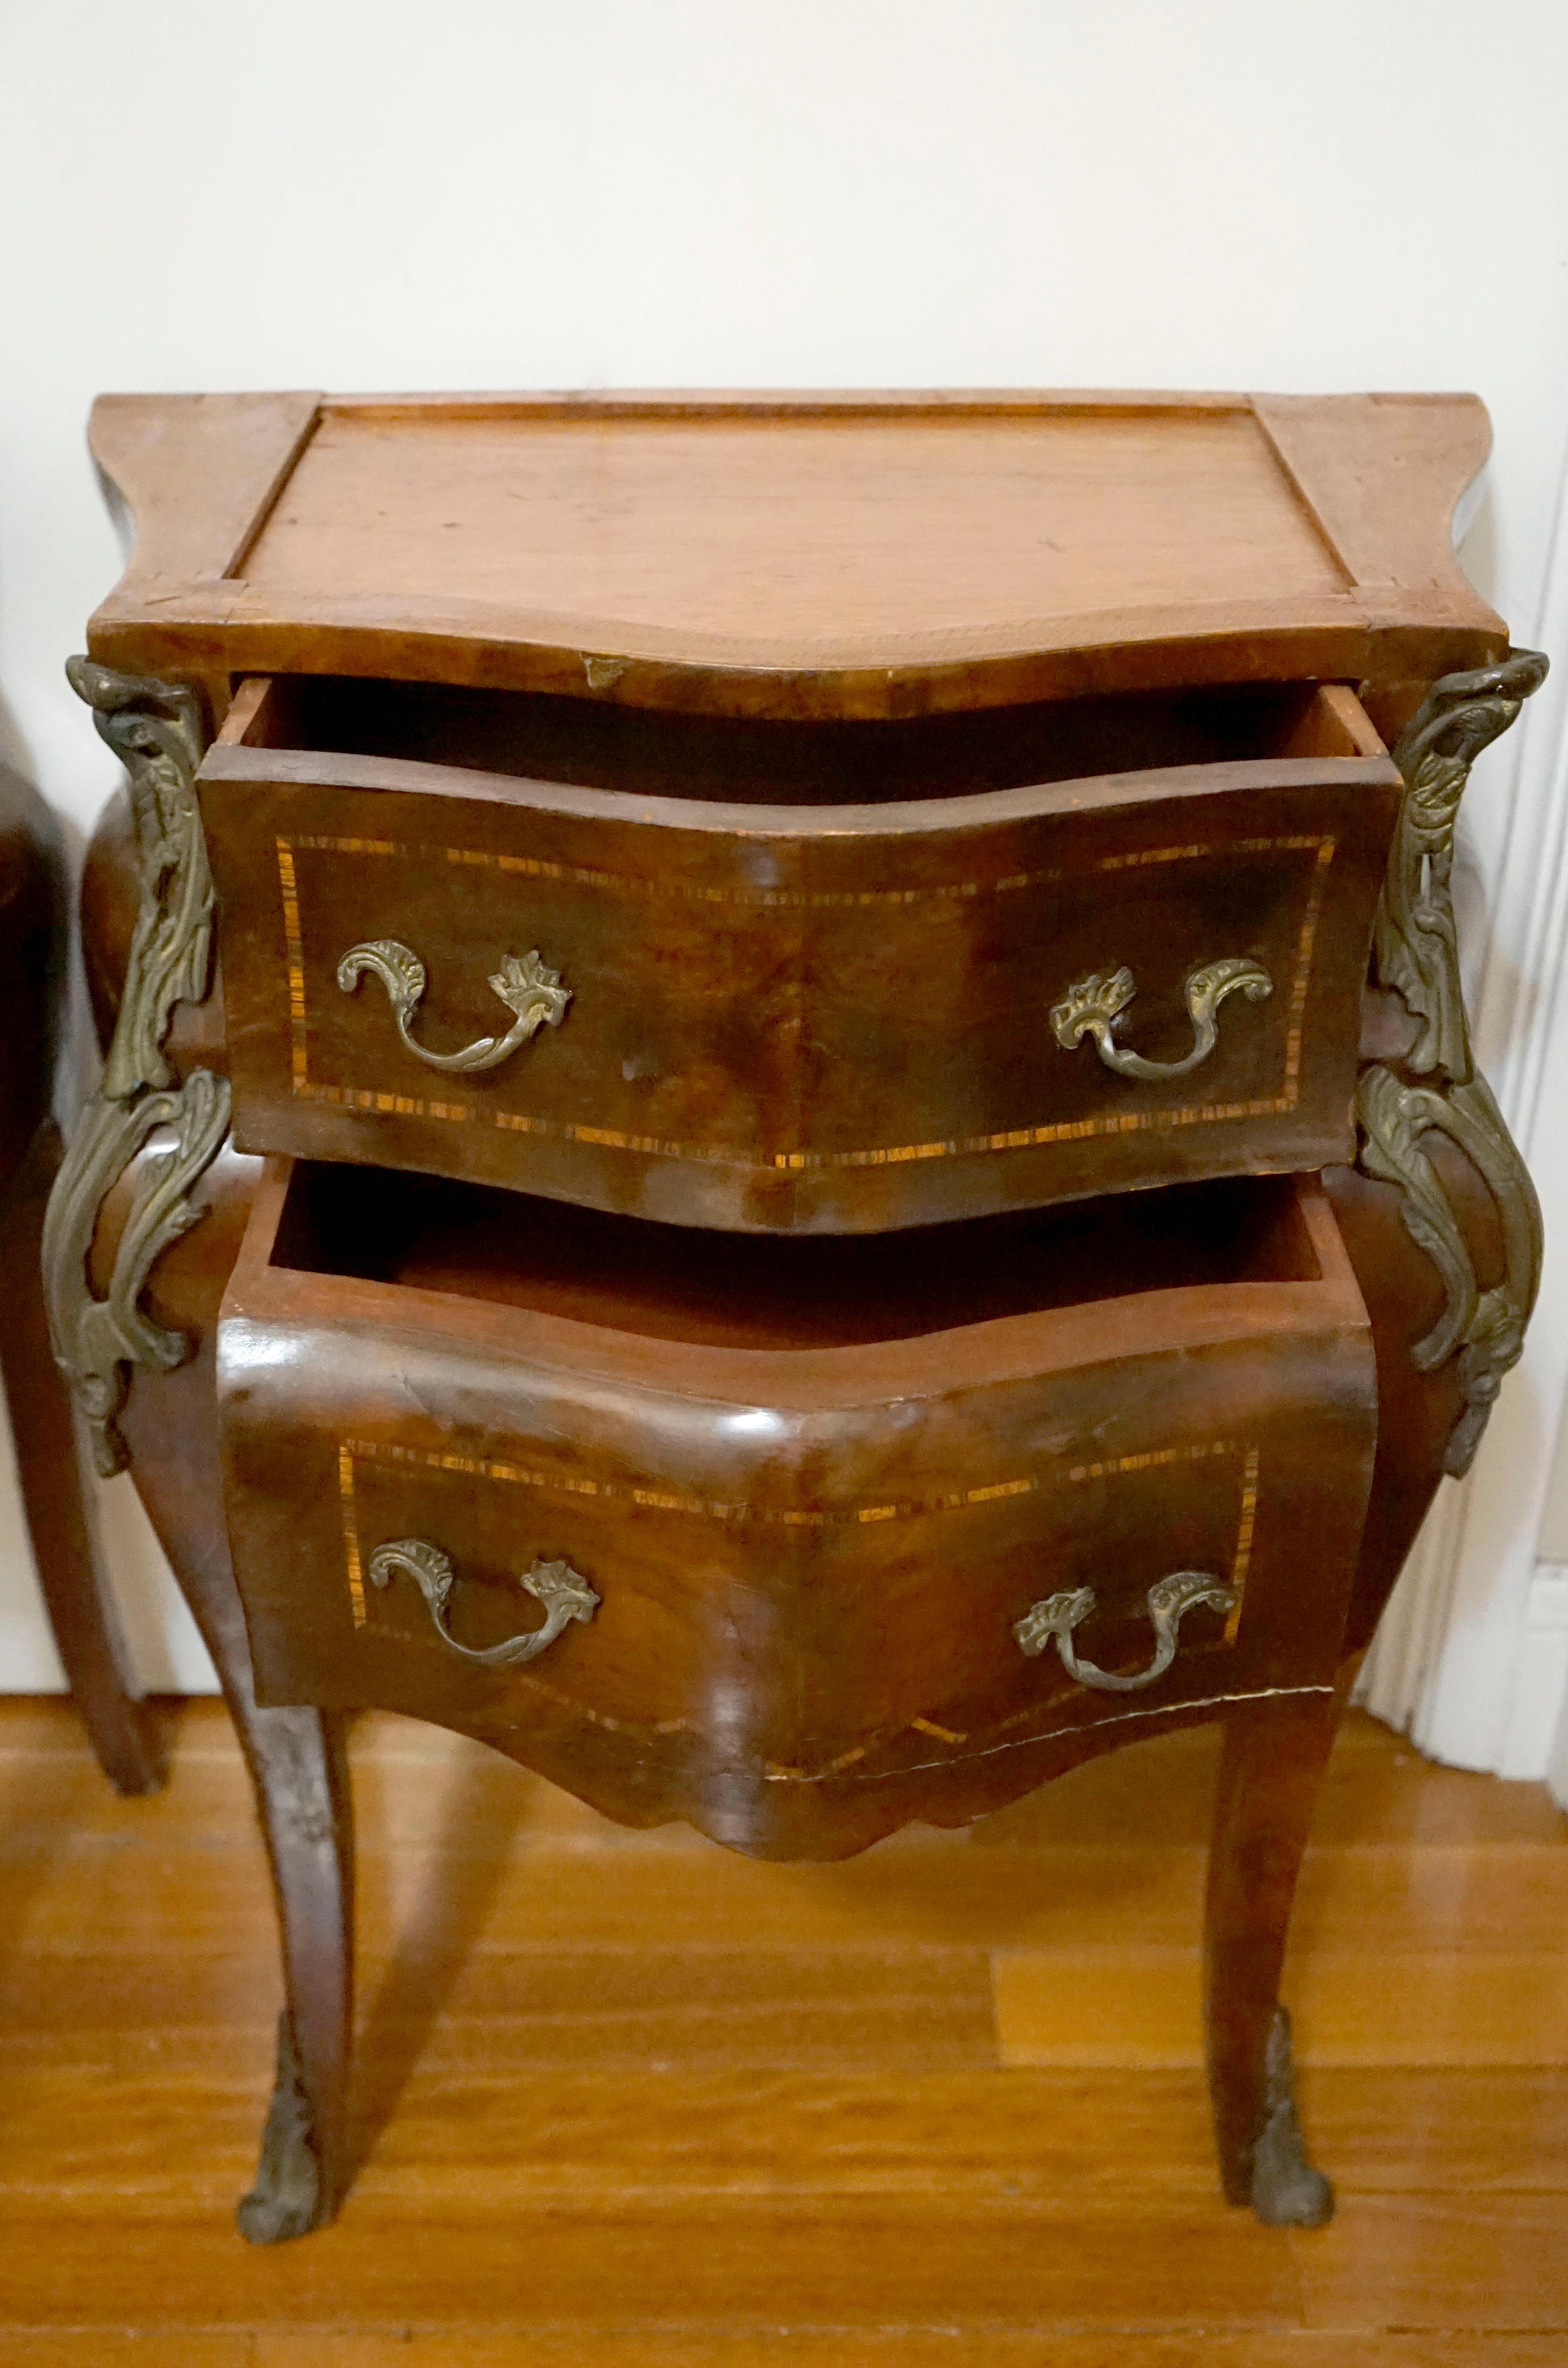 This pair of French style Louis XV nightstands are spectacular. The silhouette is beautiful with the elegant legs that rest on 